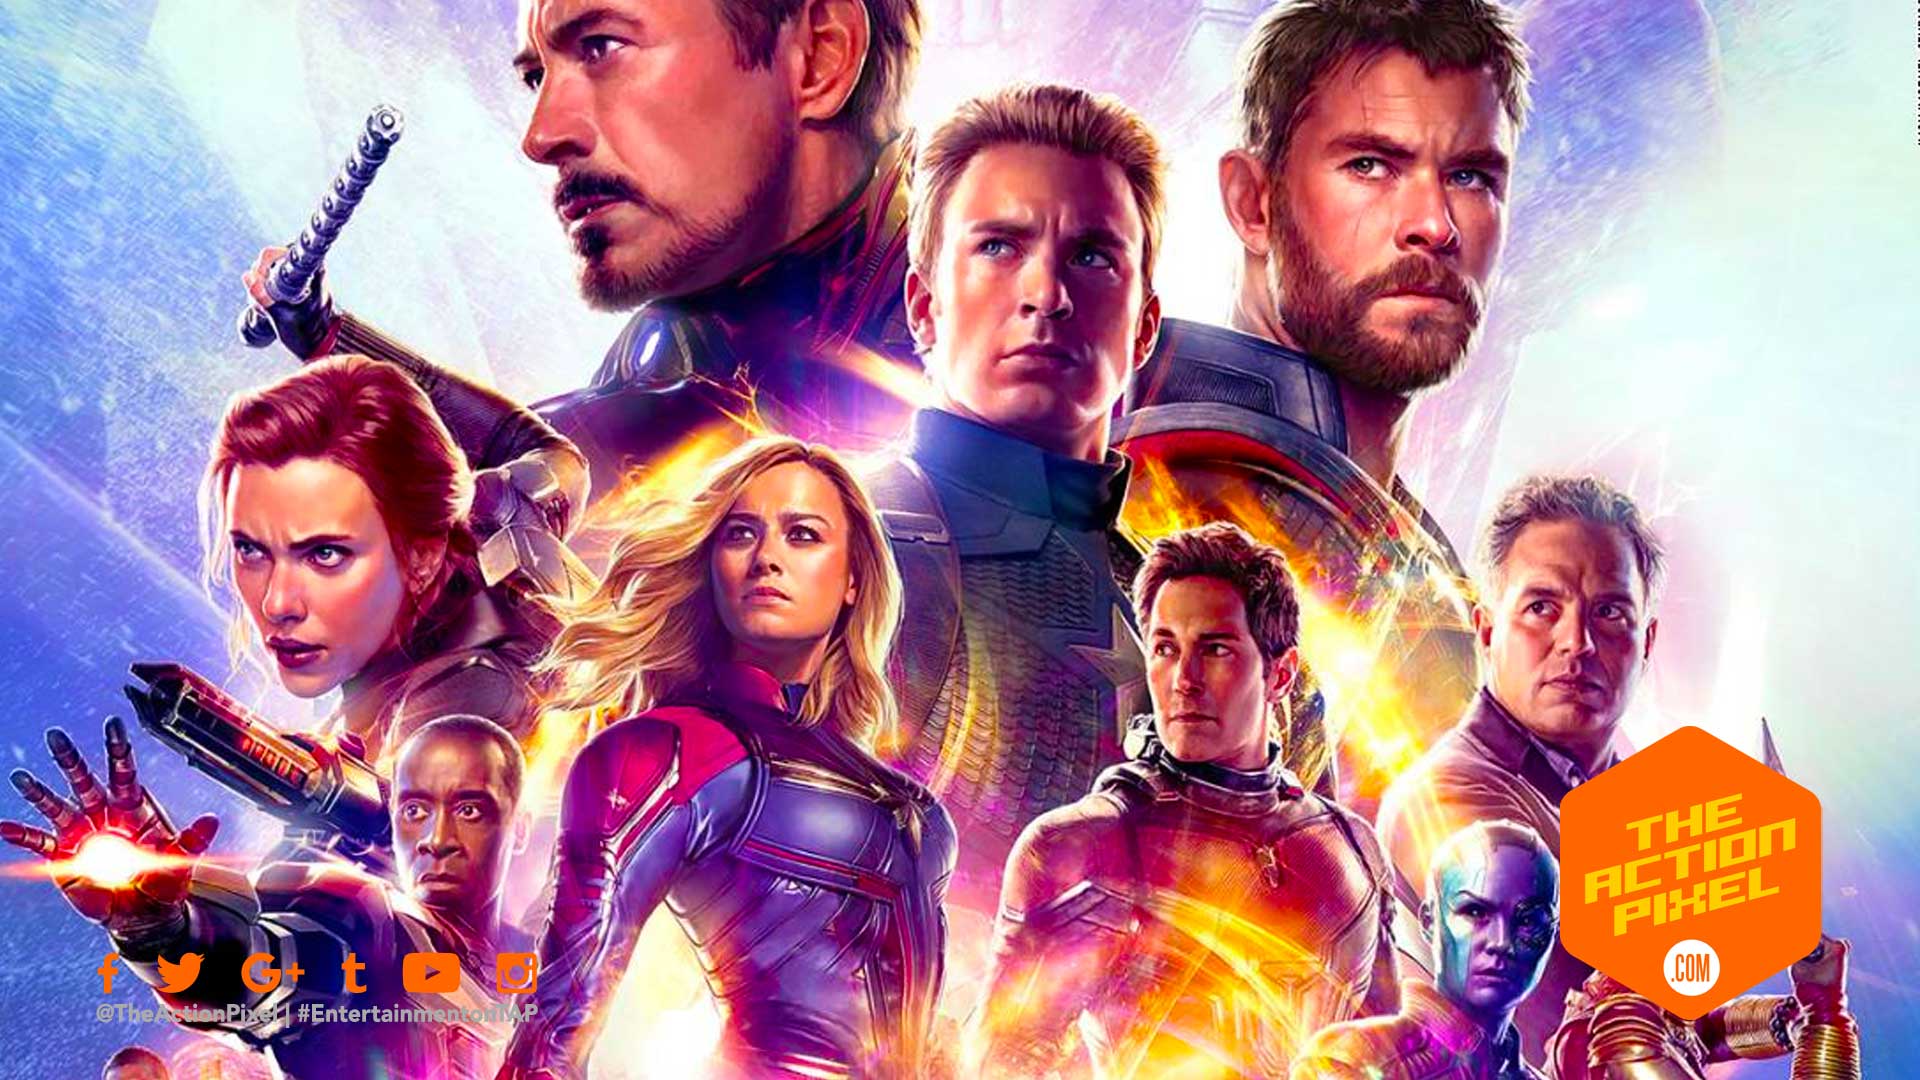 avengers endgame, film review, avengers, iron man, avengers, endgame, clip, AVENGERS RUN TIME, AVENGERS: ENDGAME RUNTIME, AVENGERS ENDGAME RUNTIME, AVENGERS ENDGAME RELEASE DATE, AVENGERS, ENDGAME RELEASE DATE UK, hawkeye,avengers: end game, tappolls,avengers 4, the action pixel, entertainment on tap, avengers, iron man, hawkeye, poster, big game , tv spot, avengers poster 2, avengers endgame official trailer, featured,tv spot, mission ,avengers endgame tv spot, no mistakes, to the end